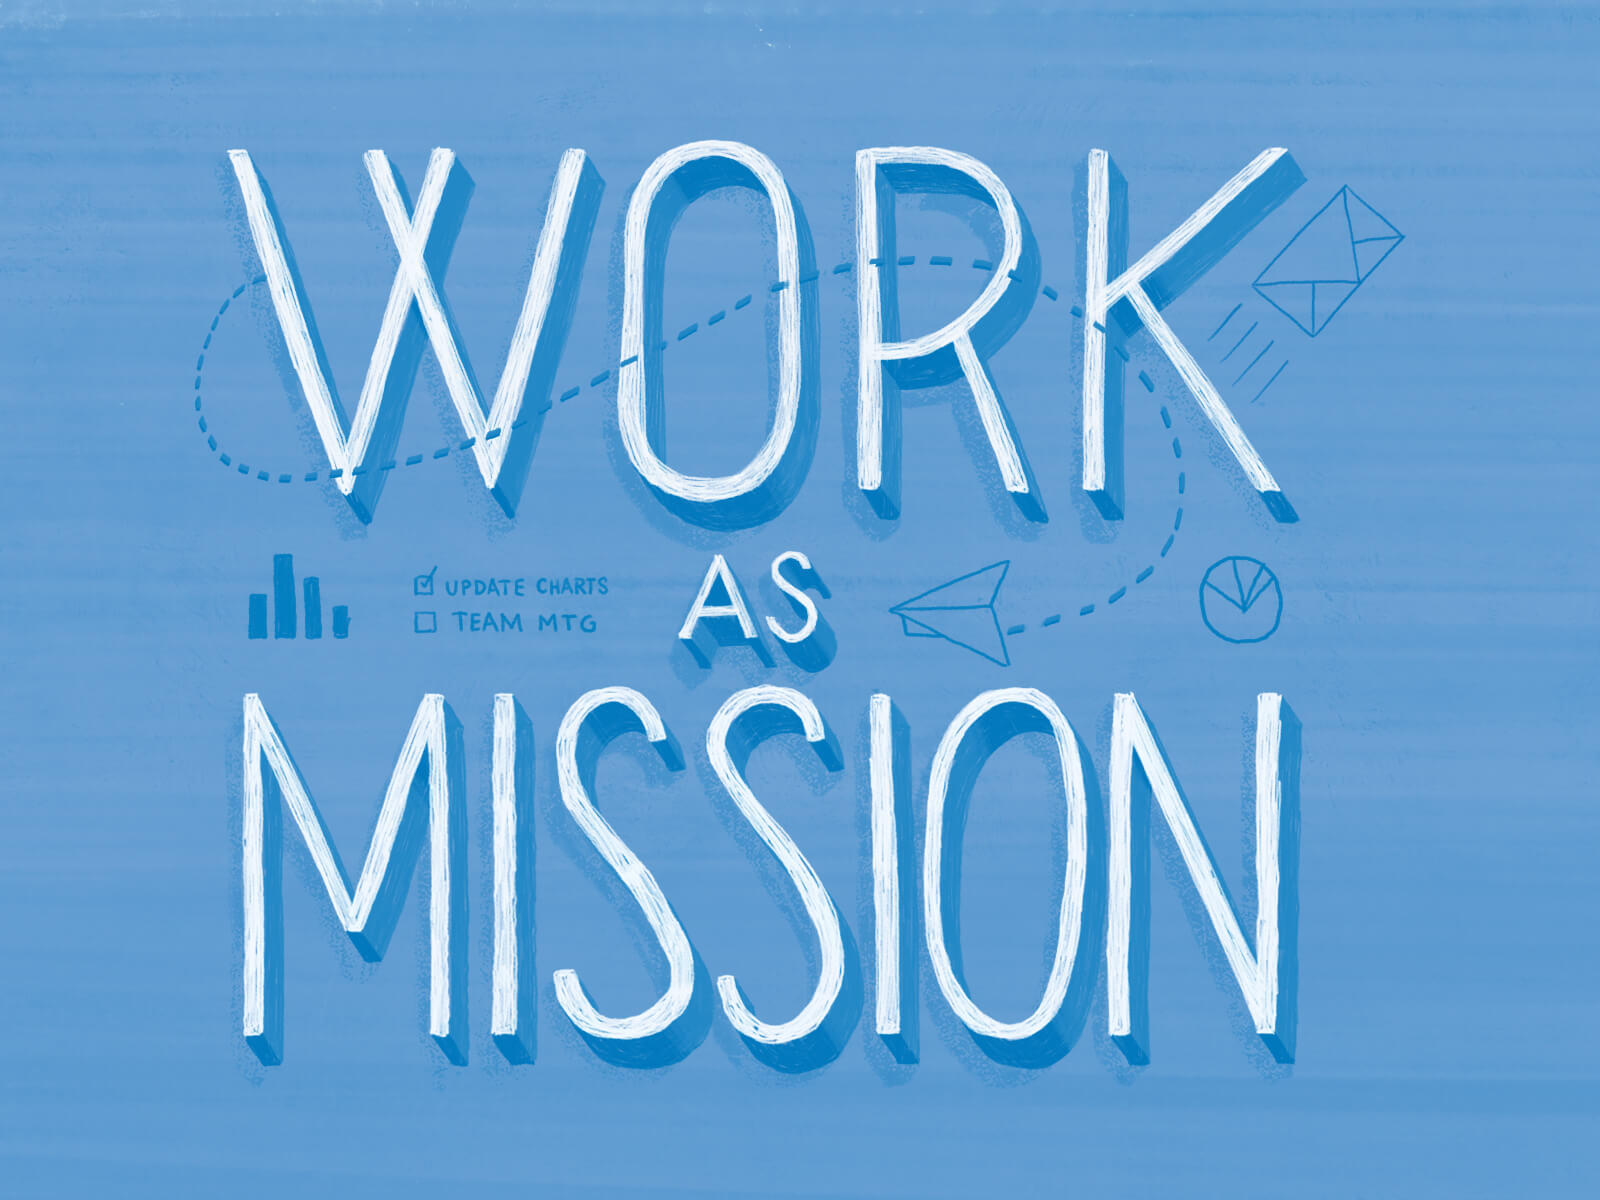 Work As Mission on a blue background with illustrated icons.